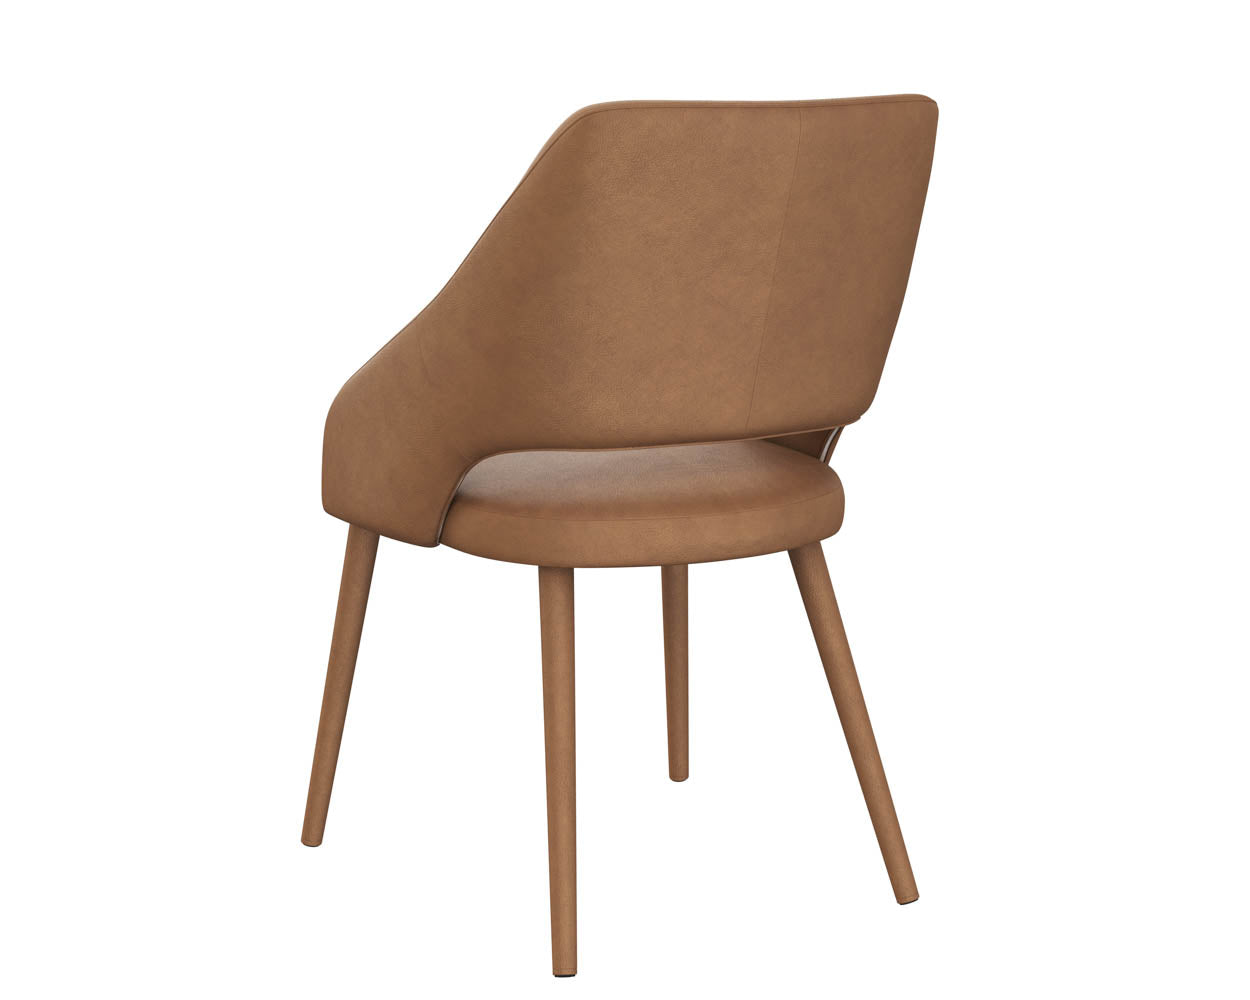 Galen Dining Chair